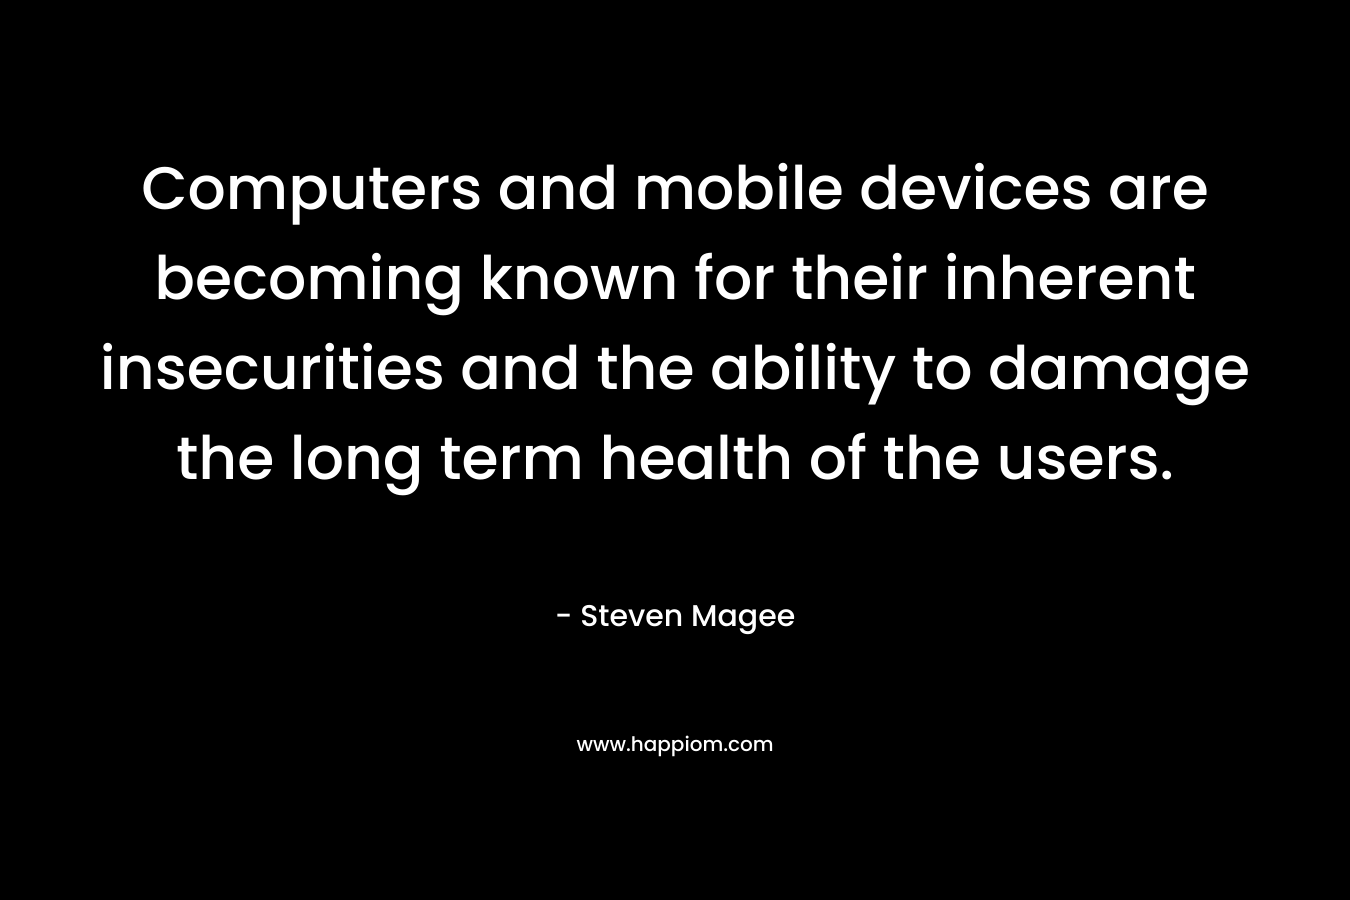 Computers and mobile devices are becoming known for their inherent insecurities and the ability to damage the long term health of the users.